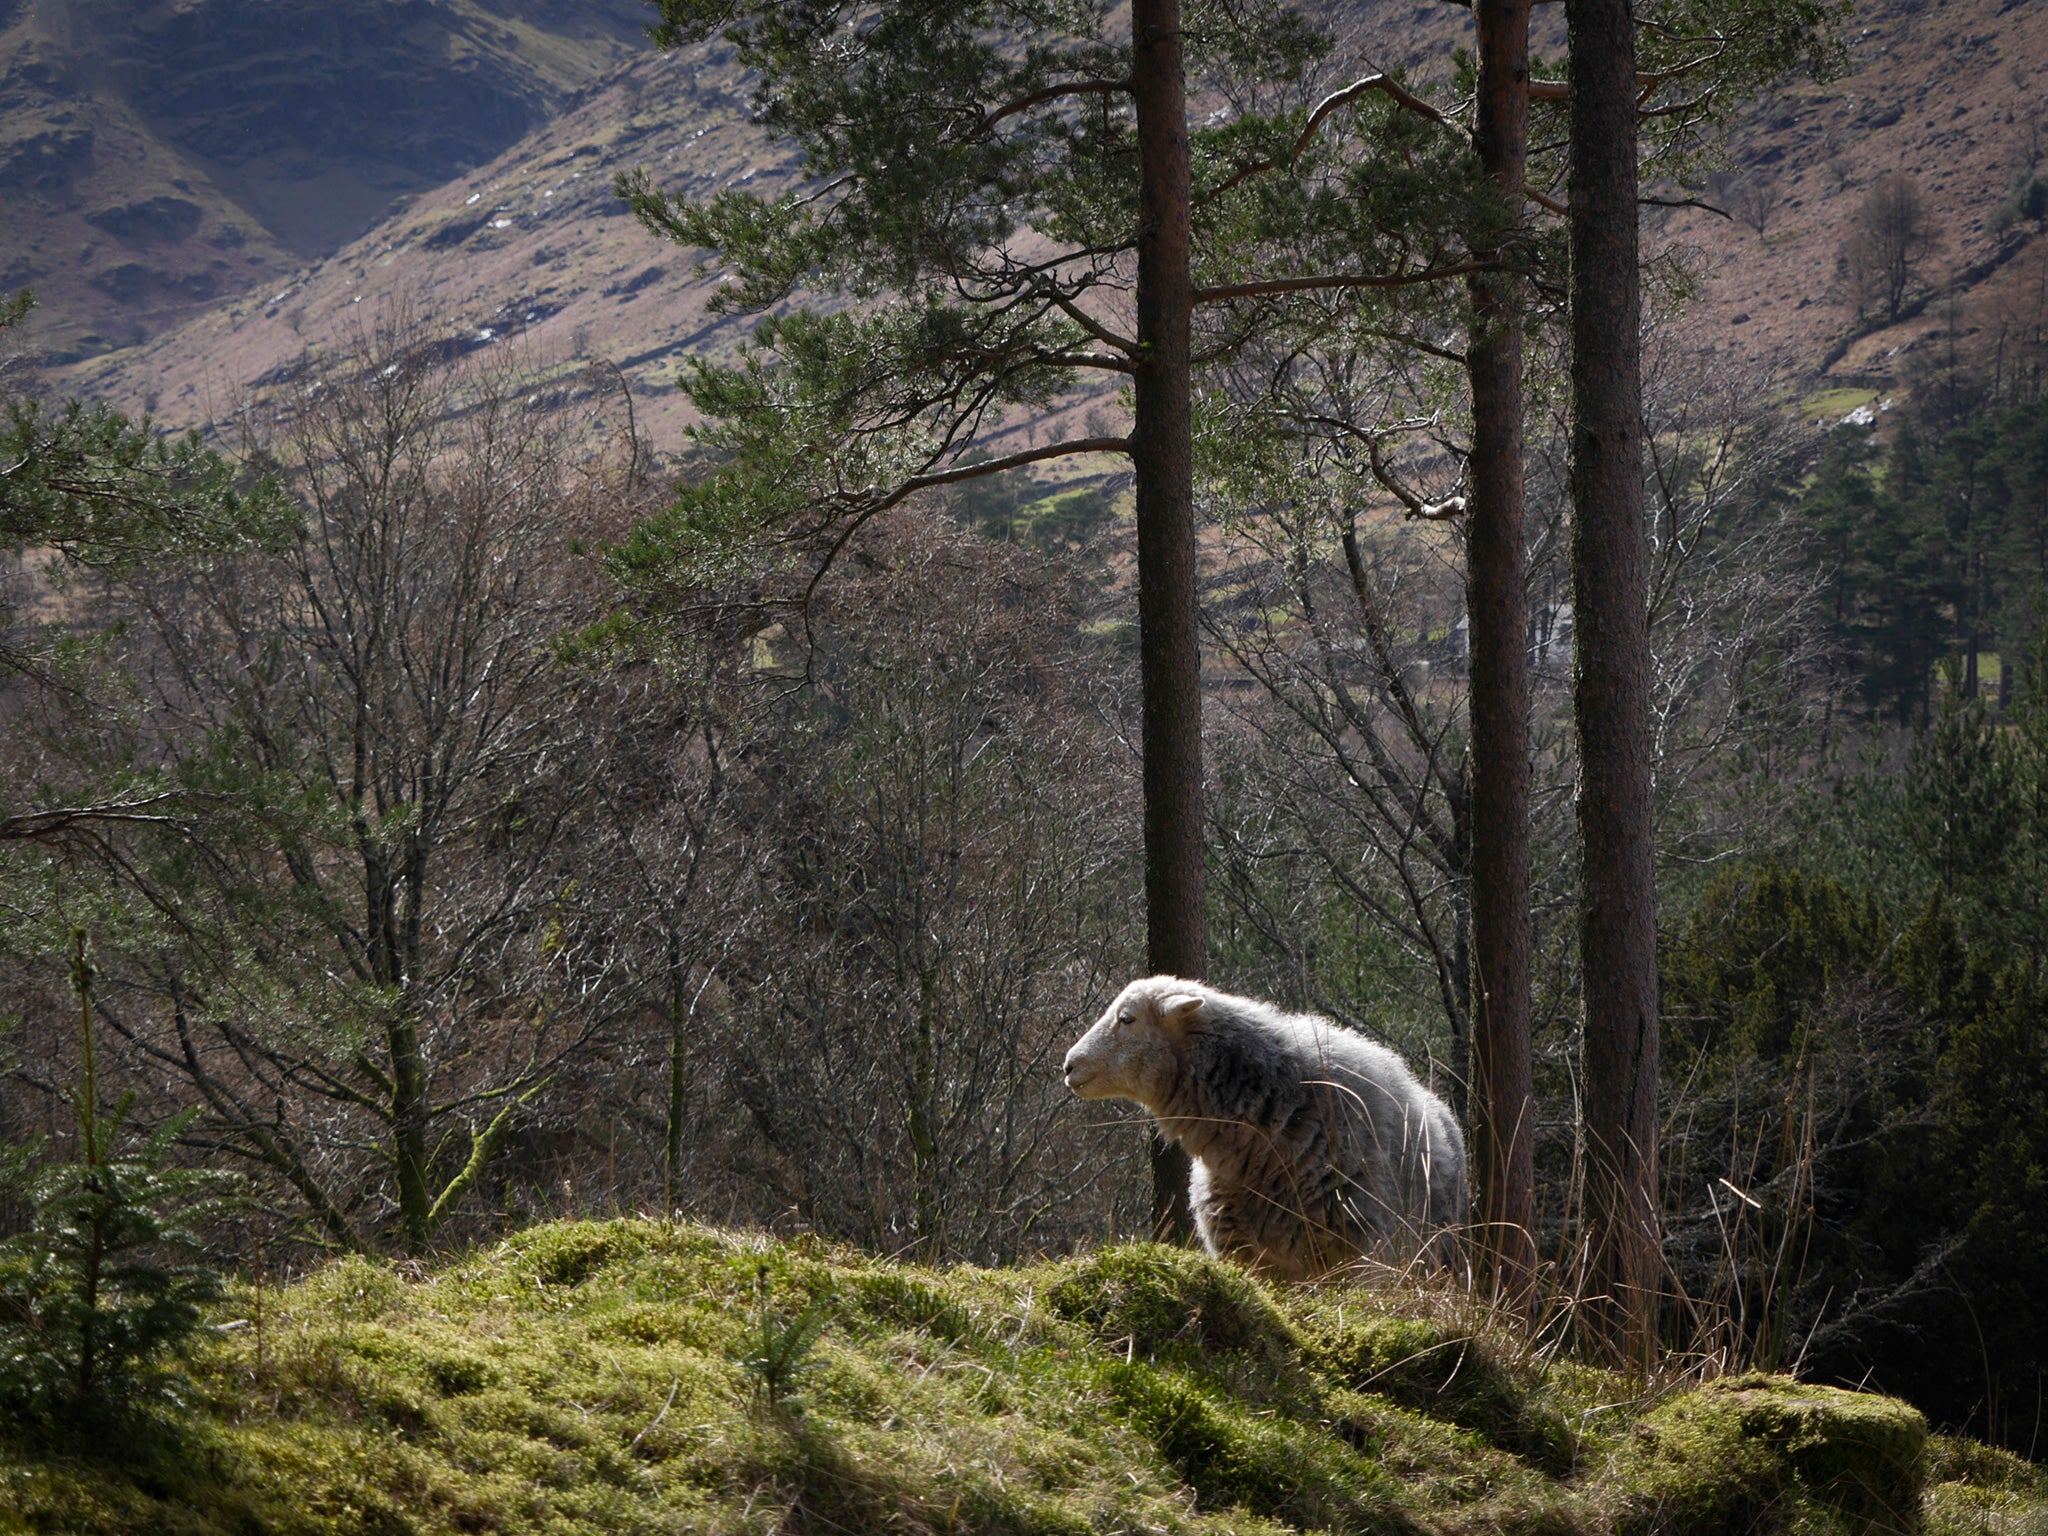 The ability of Herdwick sheep to graze freely and find shelter by themselves could be disrupted by plans to erect a six-mile fence around 866 hectares of land above Thirlmere reservoir